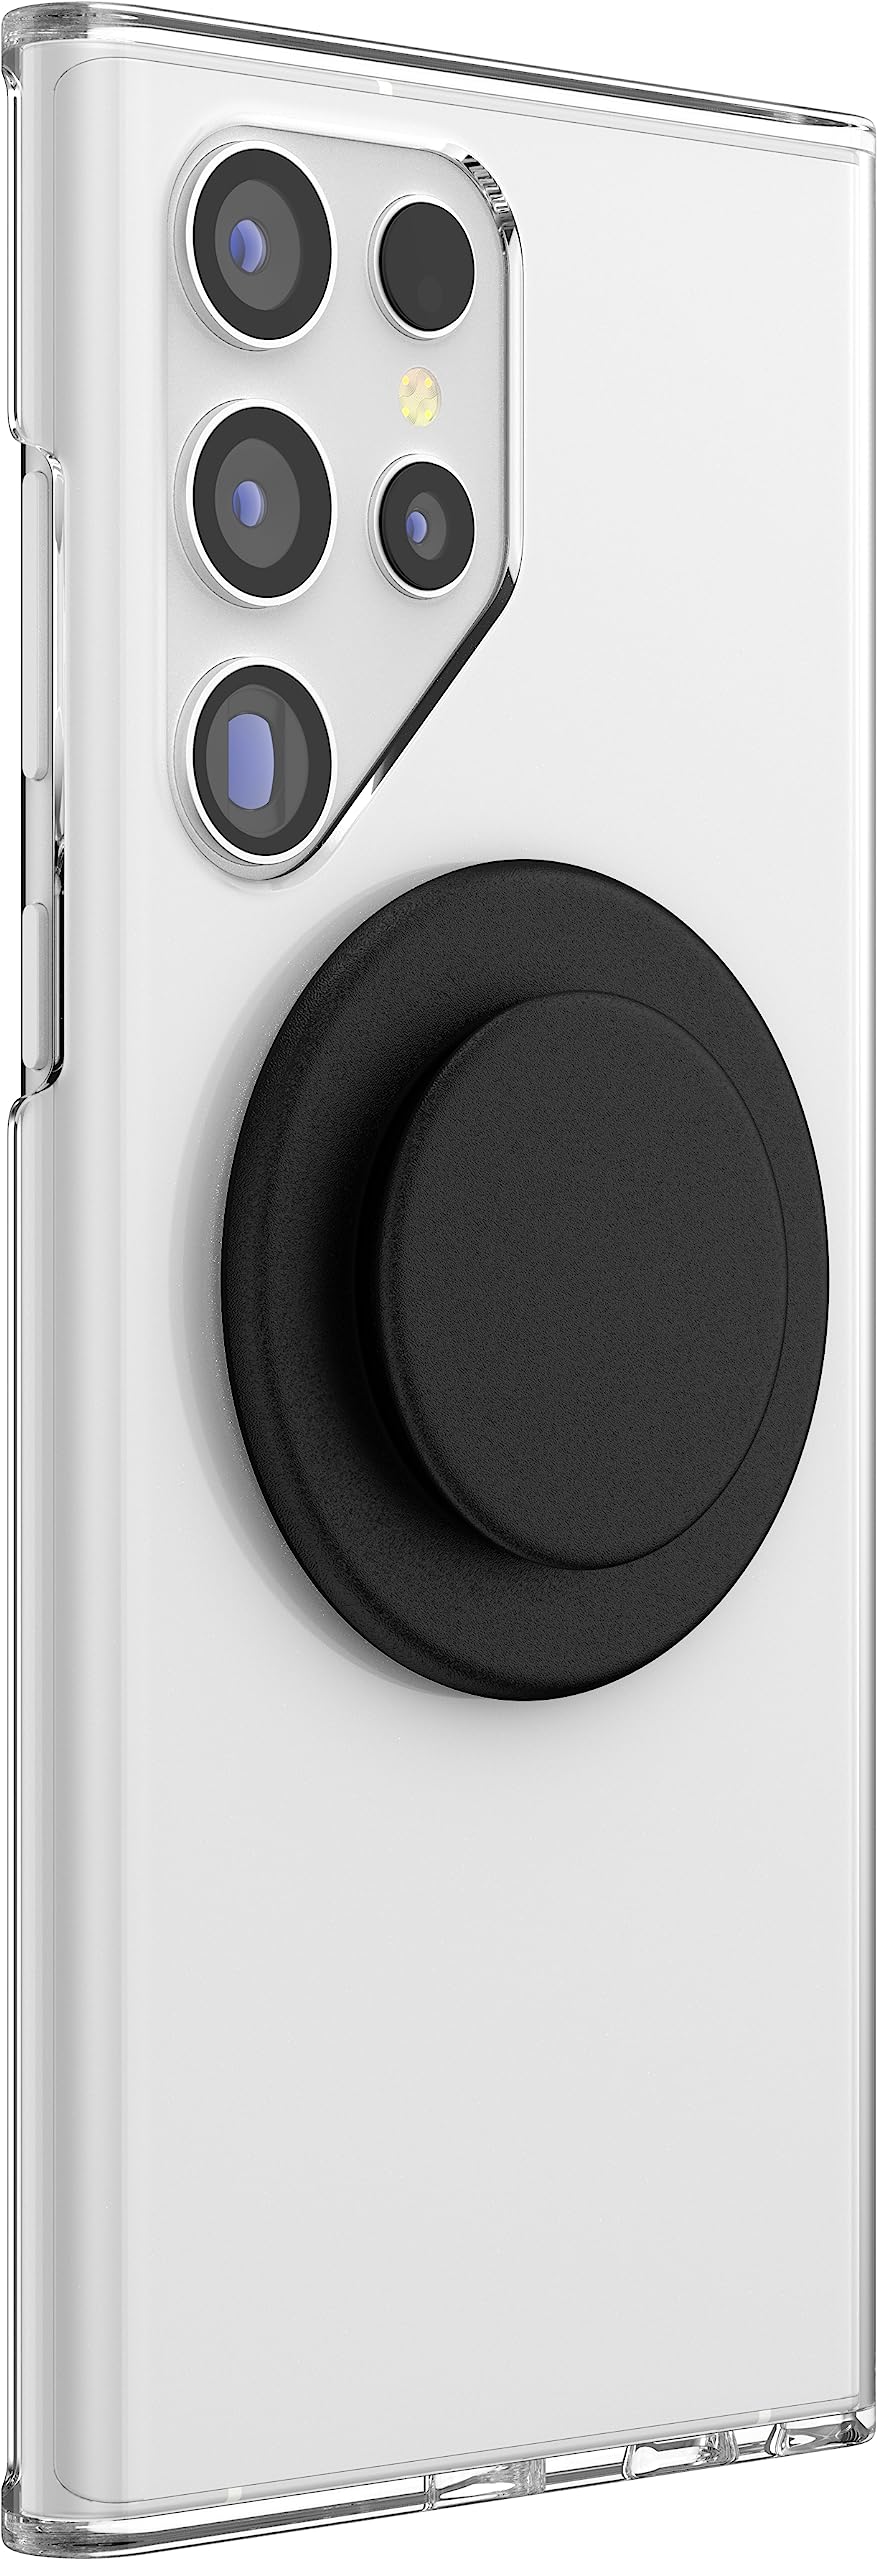 PopSockets Adapter Ring for MagSafe, Magnetic Adapter for Android, Magnetic Phone Attachment Ring - Black